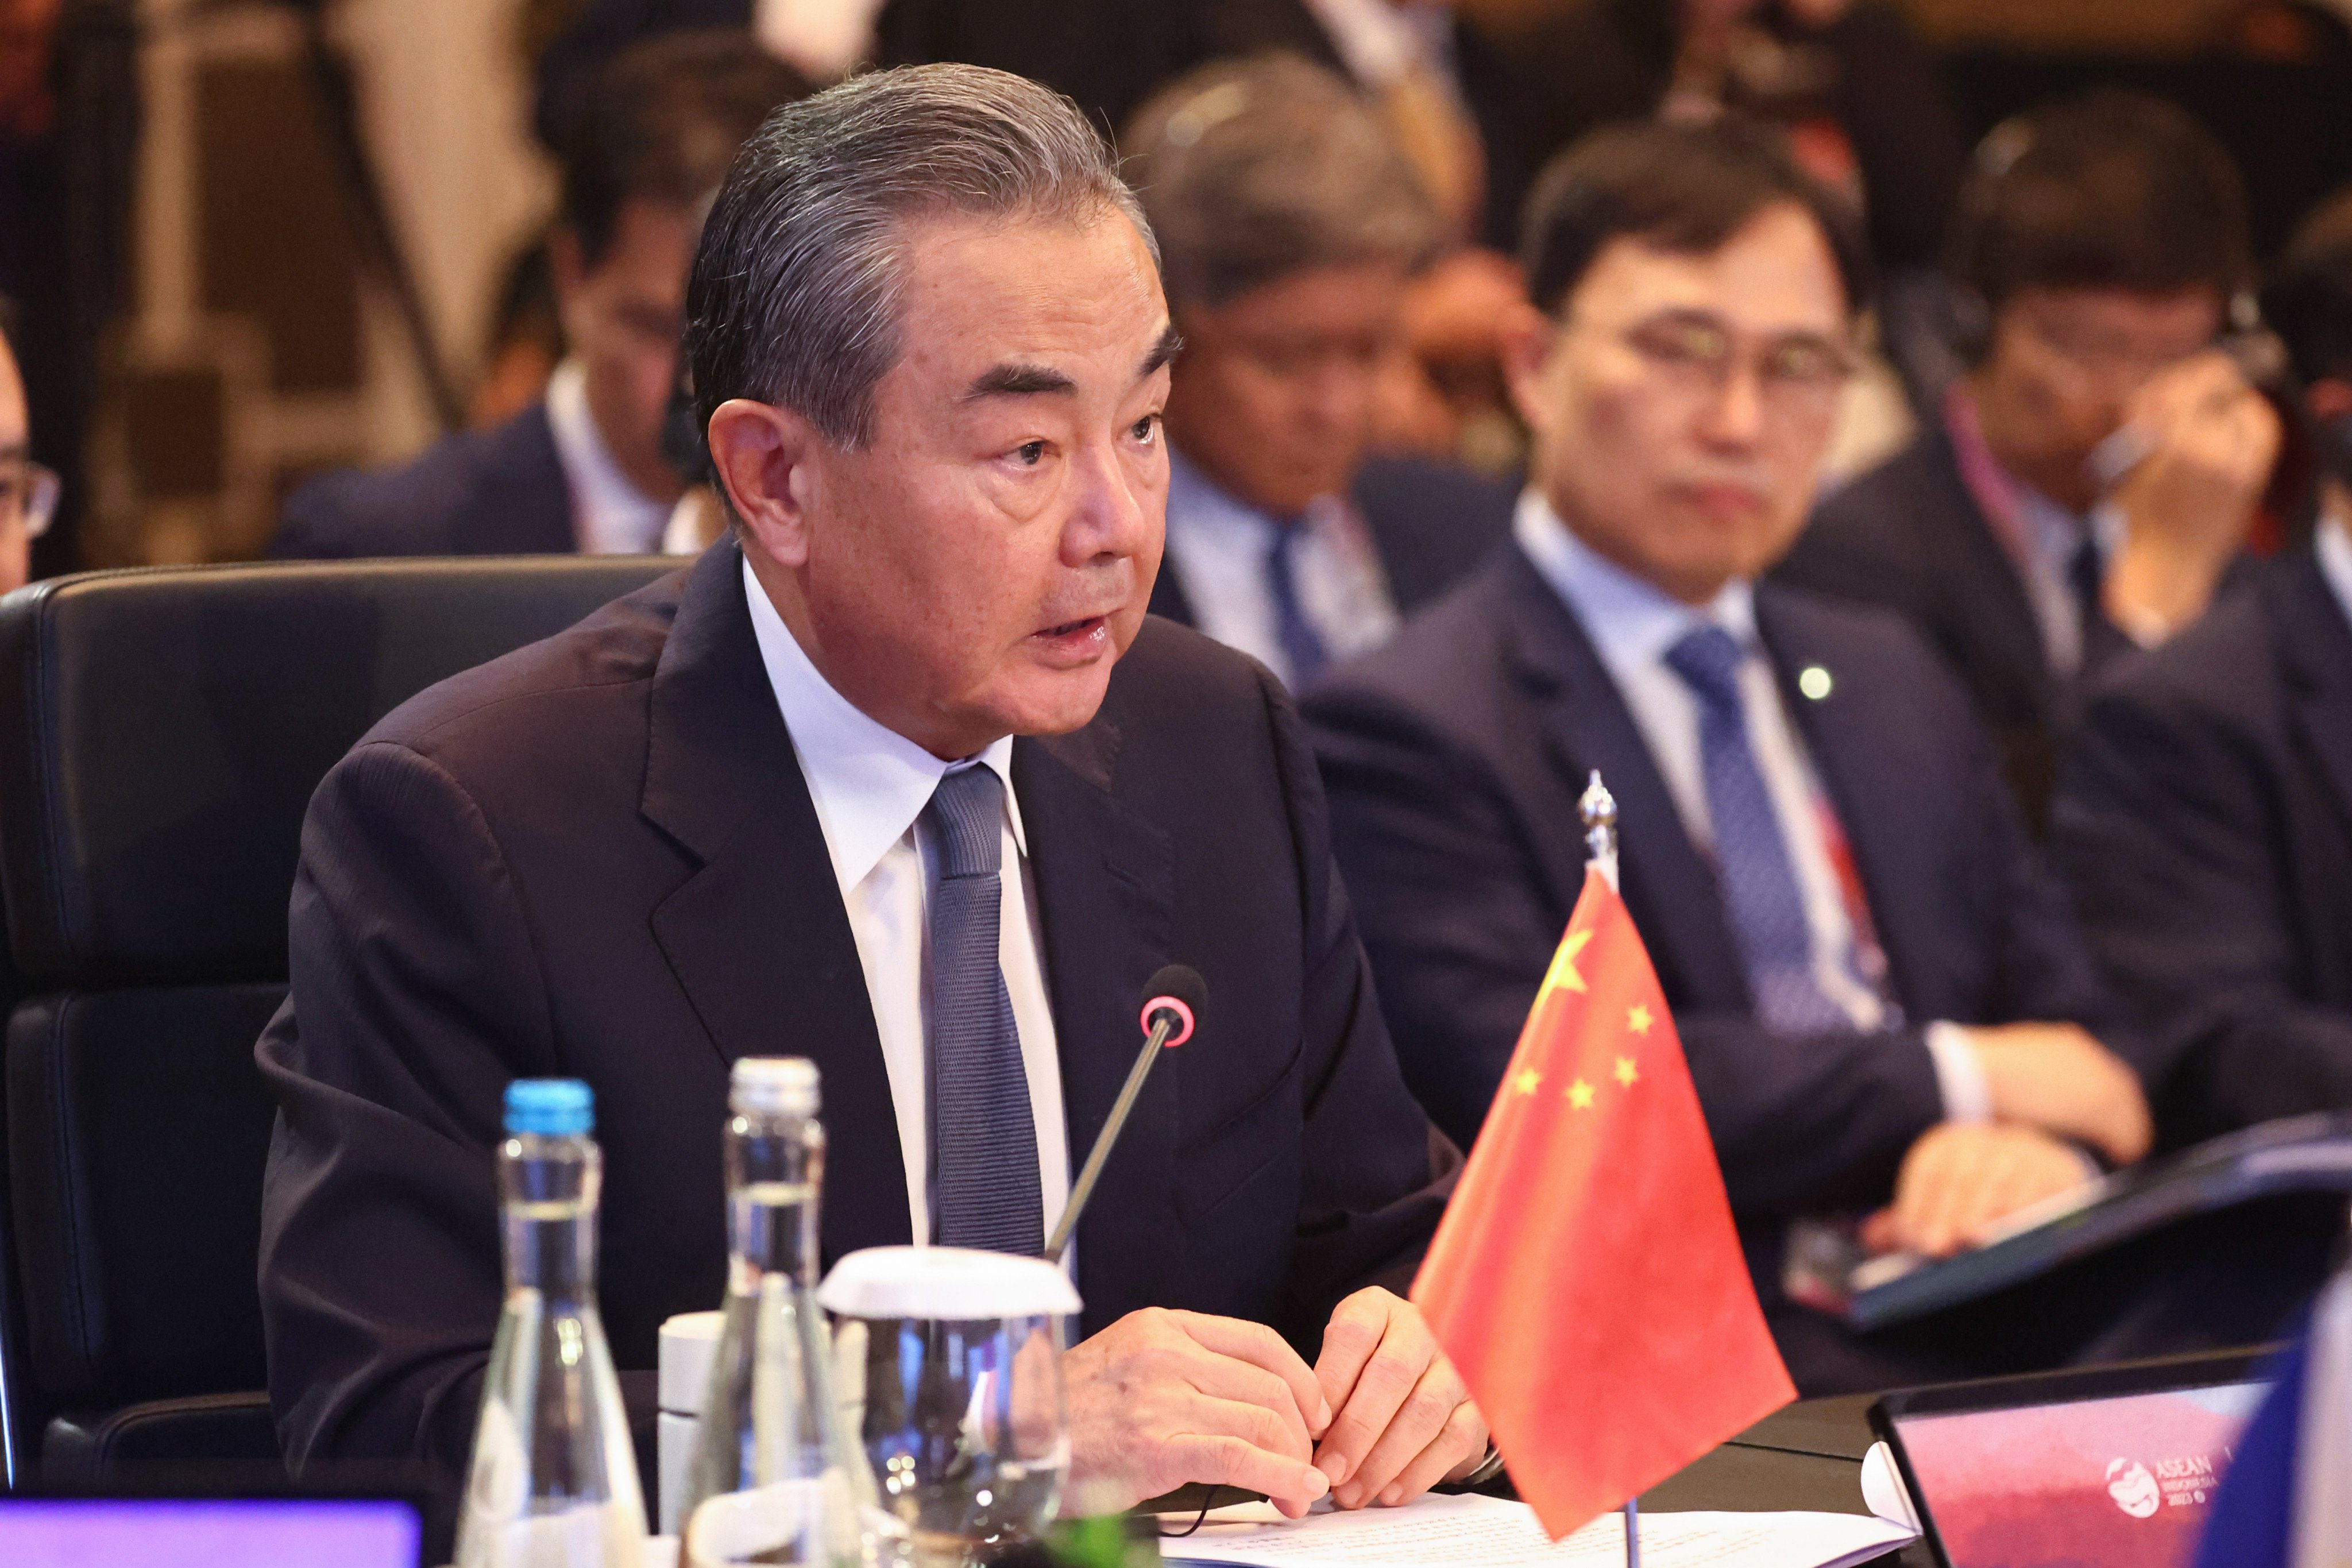 Wang Yi says the economic bond between China and its southern neighbours could be made stronger by increasing connectivity under Beijing’s flagship Belt and Road Initiative. Photo: dpa